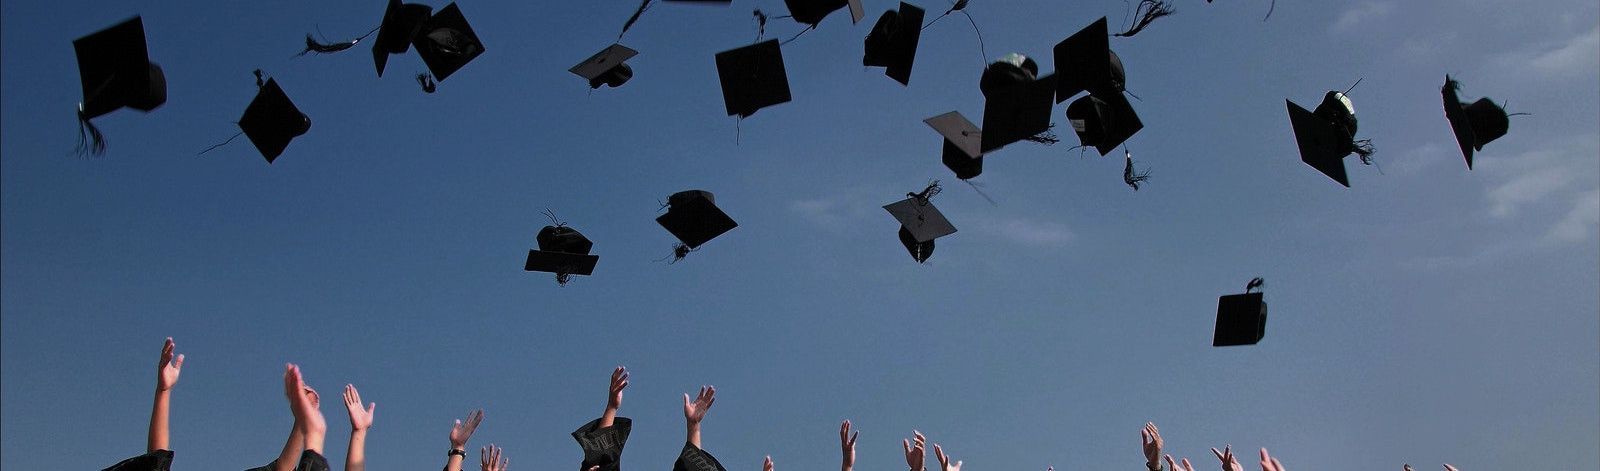 Photo of graduate students in black gowns throwing their matching mortarboards in the air. The mortarboards are suspended in the air at the top against a blue sky. Student hands point upward from the bottom of the photo as they throw their hats in the air